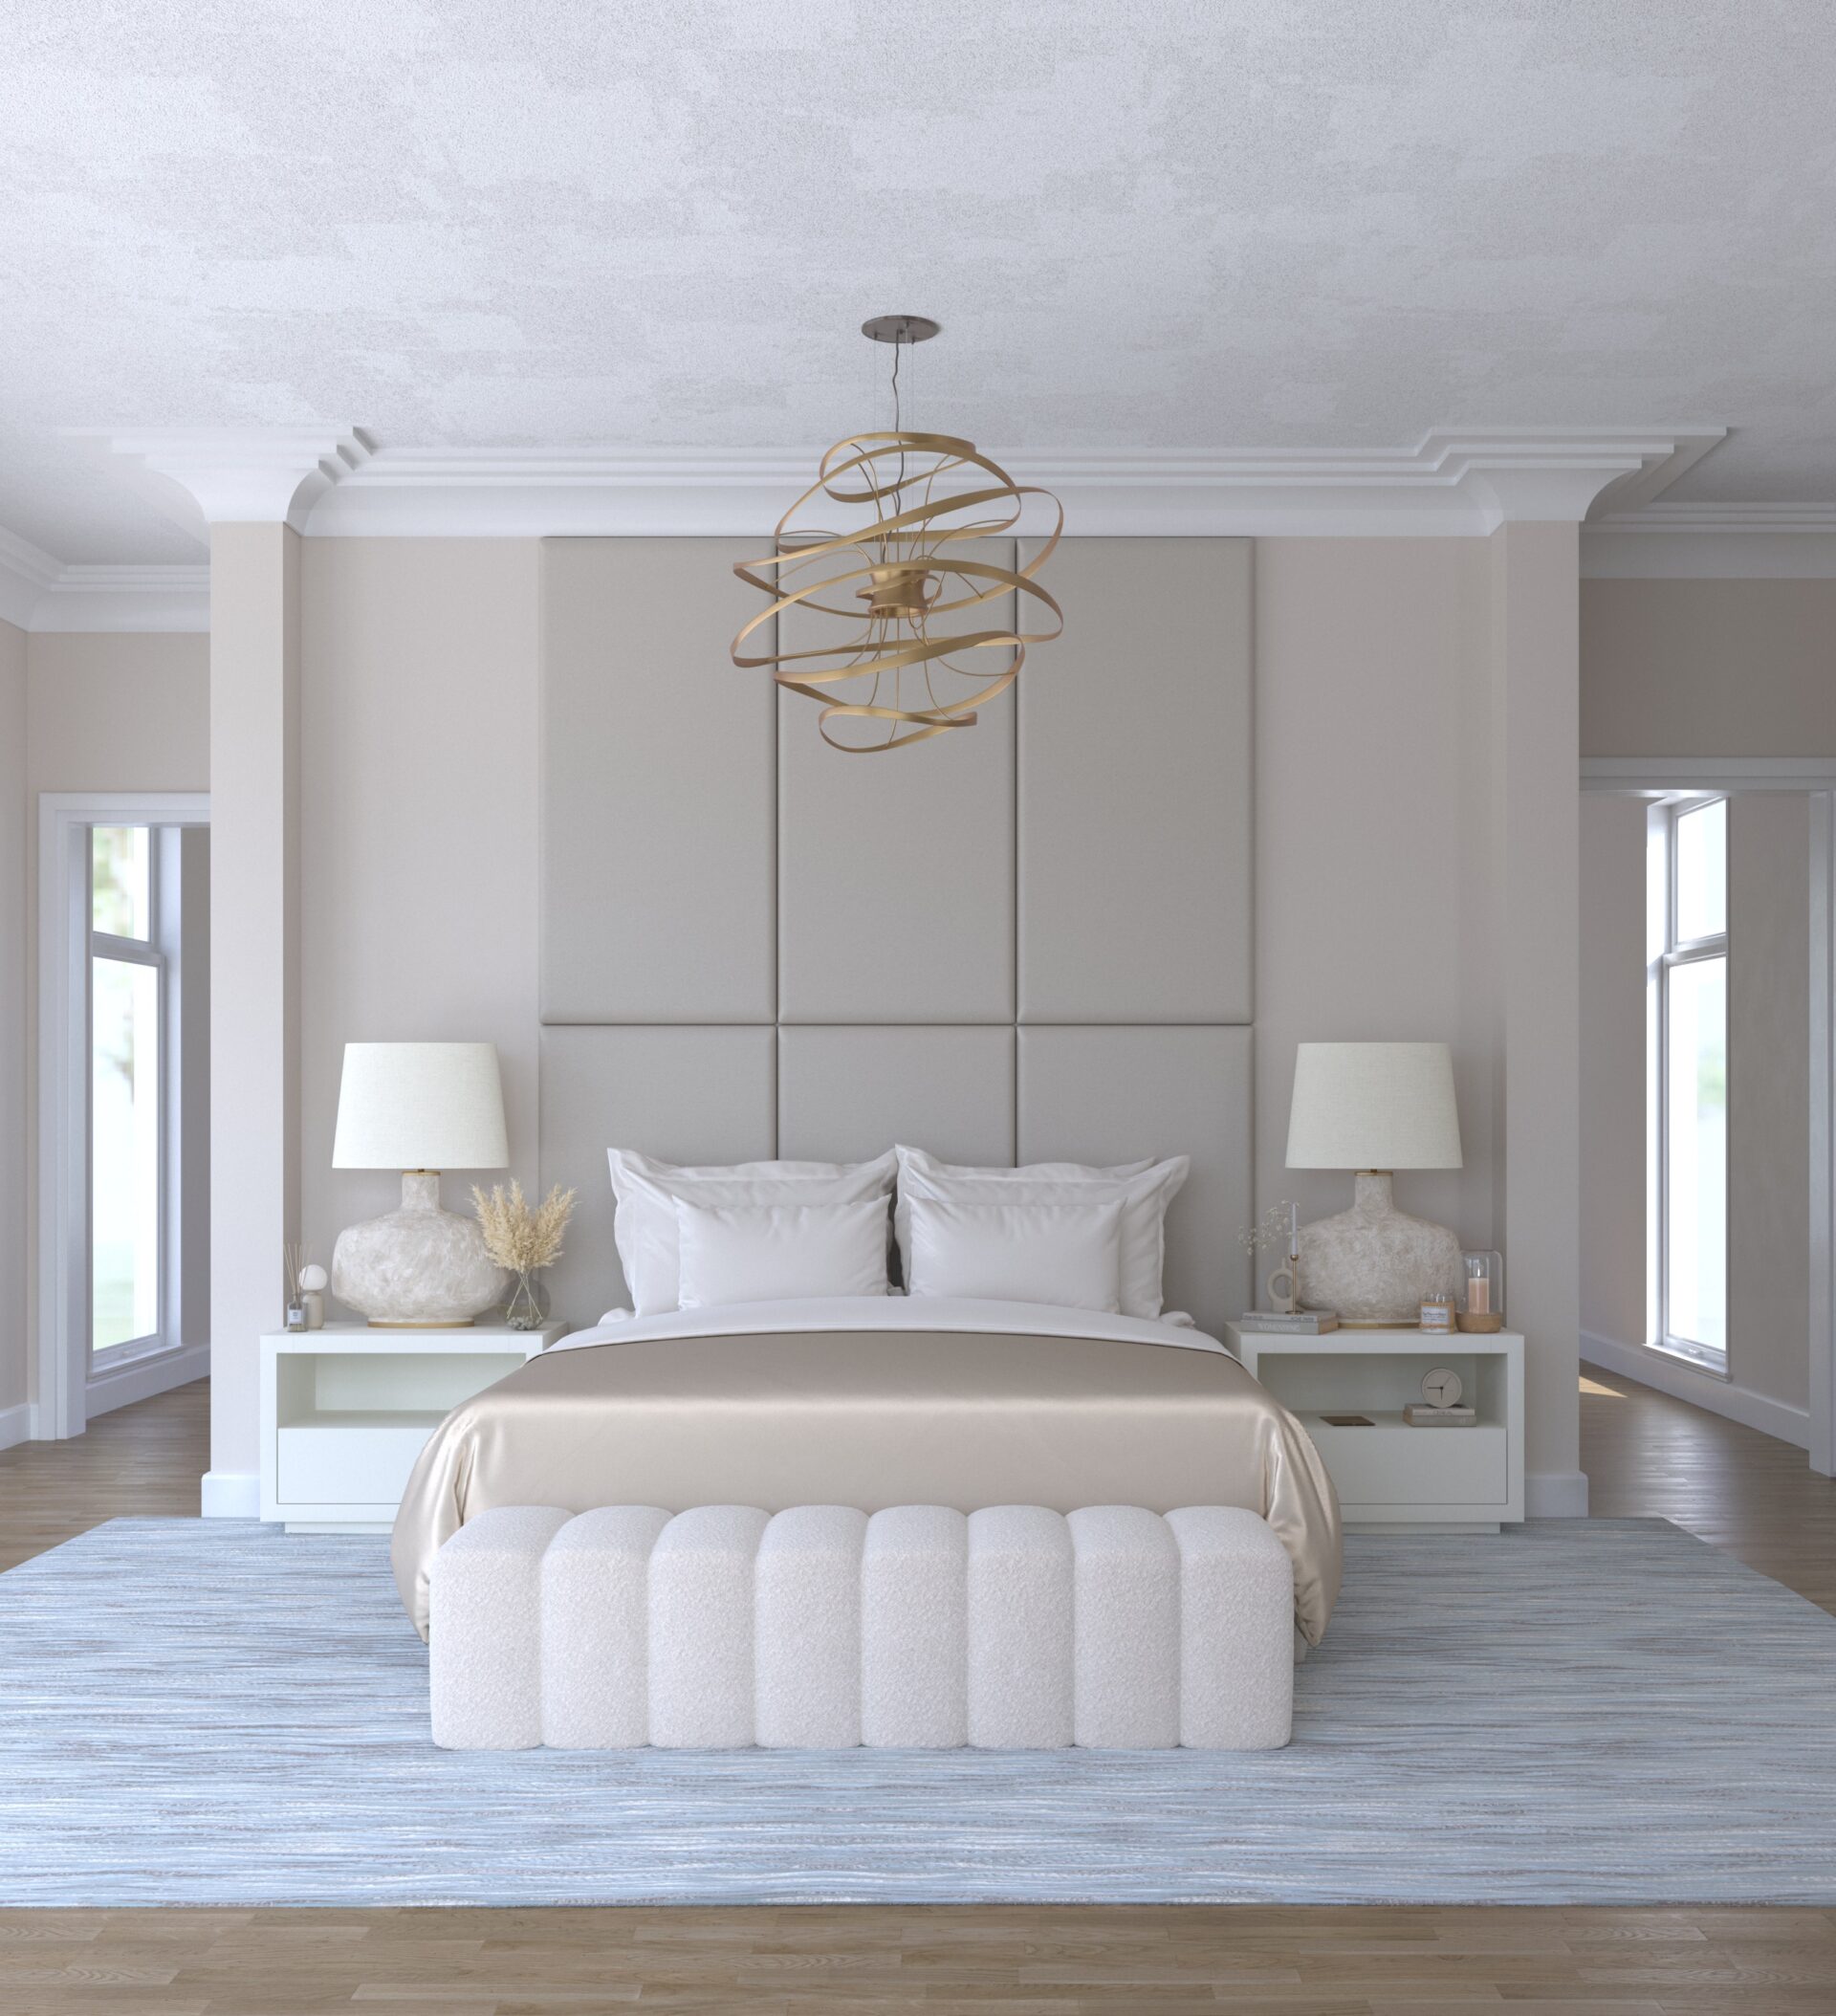 LUDLOW-upholstered-wall-mounted-headboard-bed-luxury-furniture-blend-home-furnishings